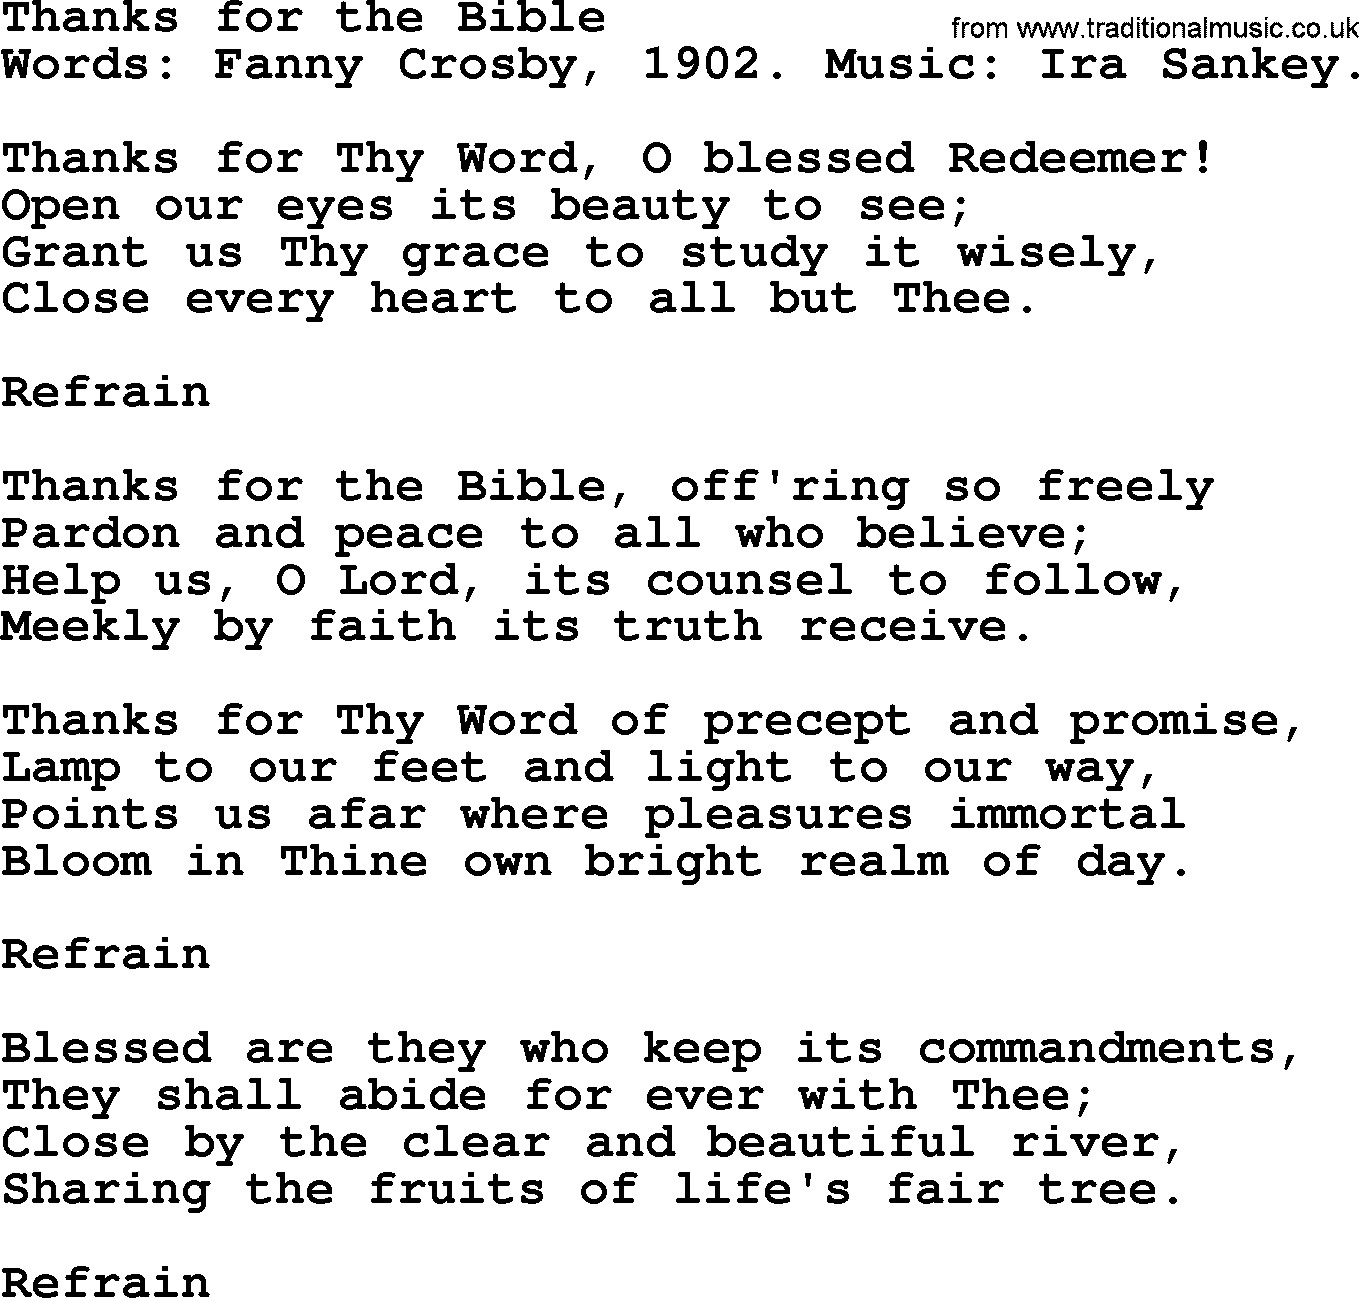 Fanny Crosby song: Thanks For The Bible, lyrics